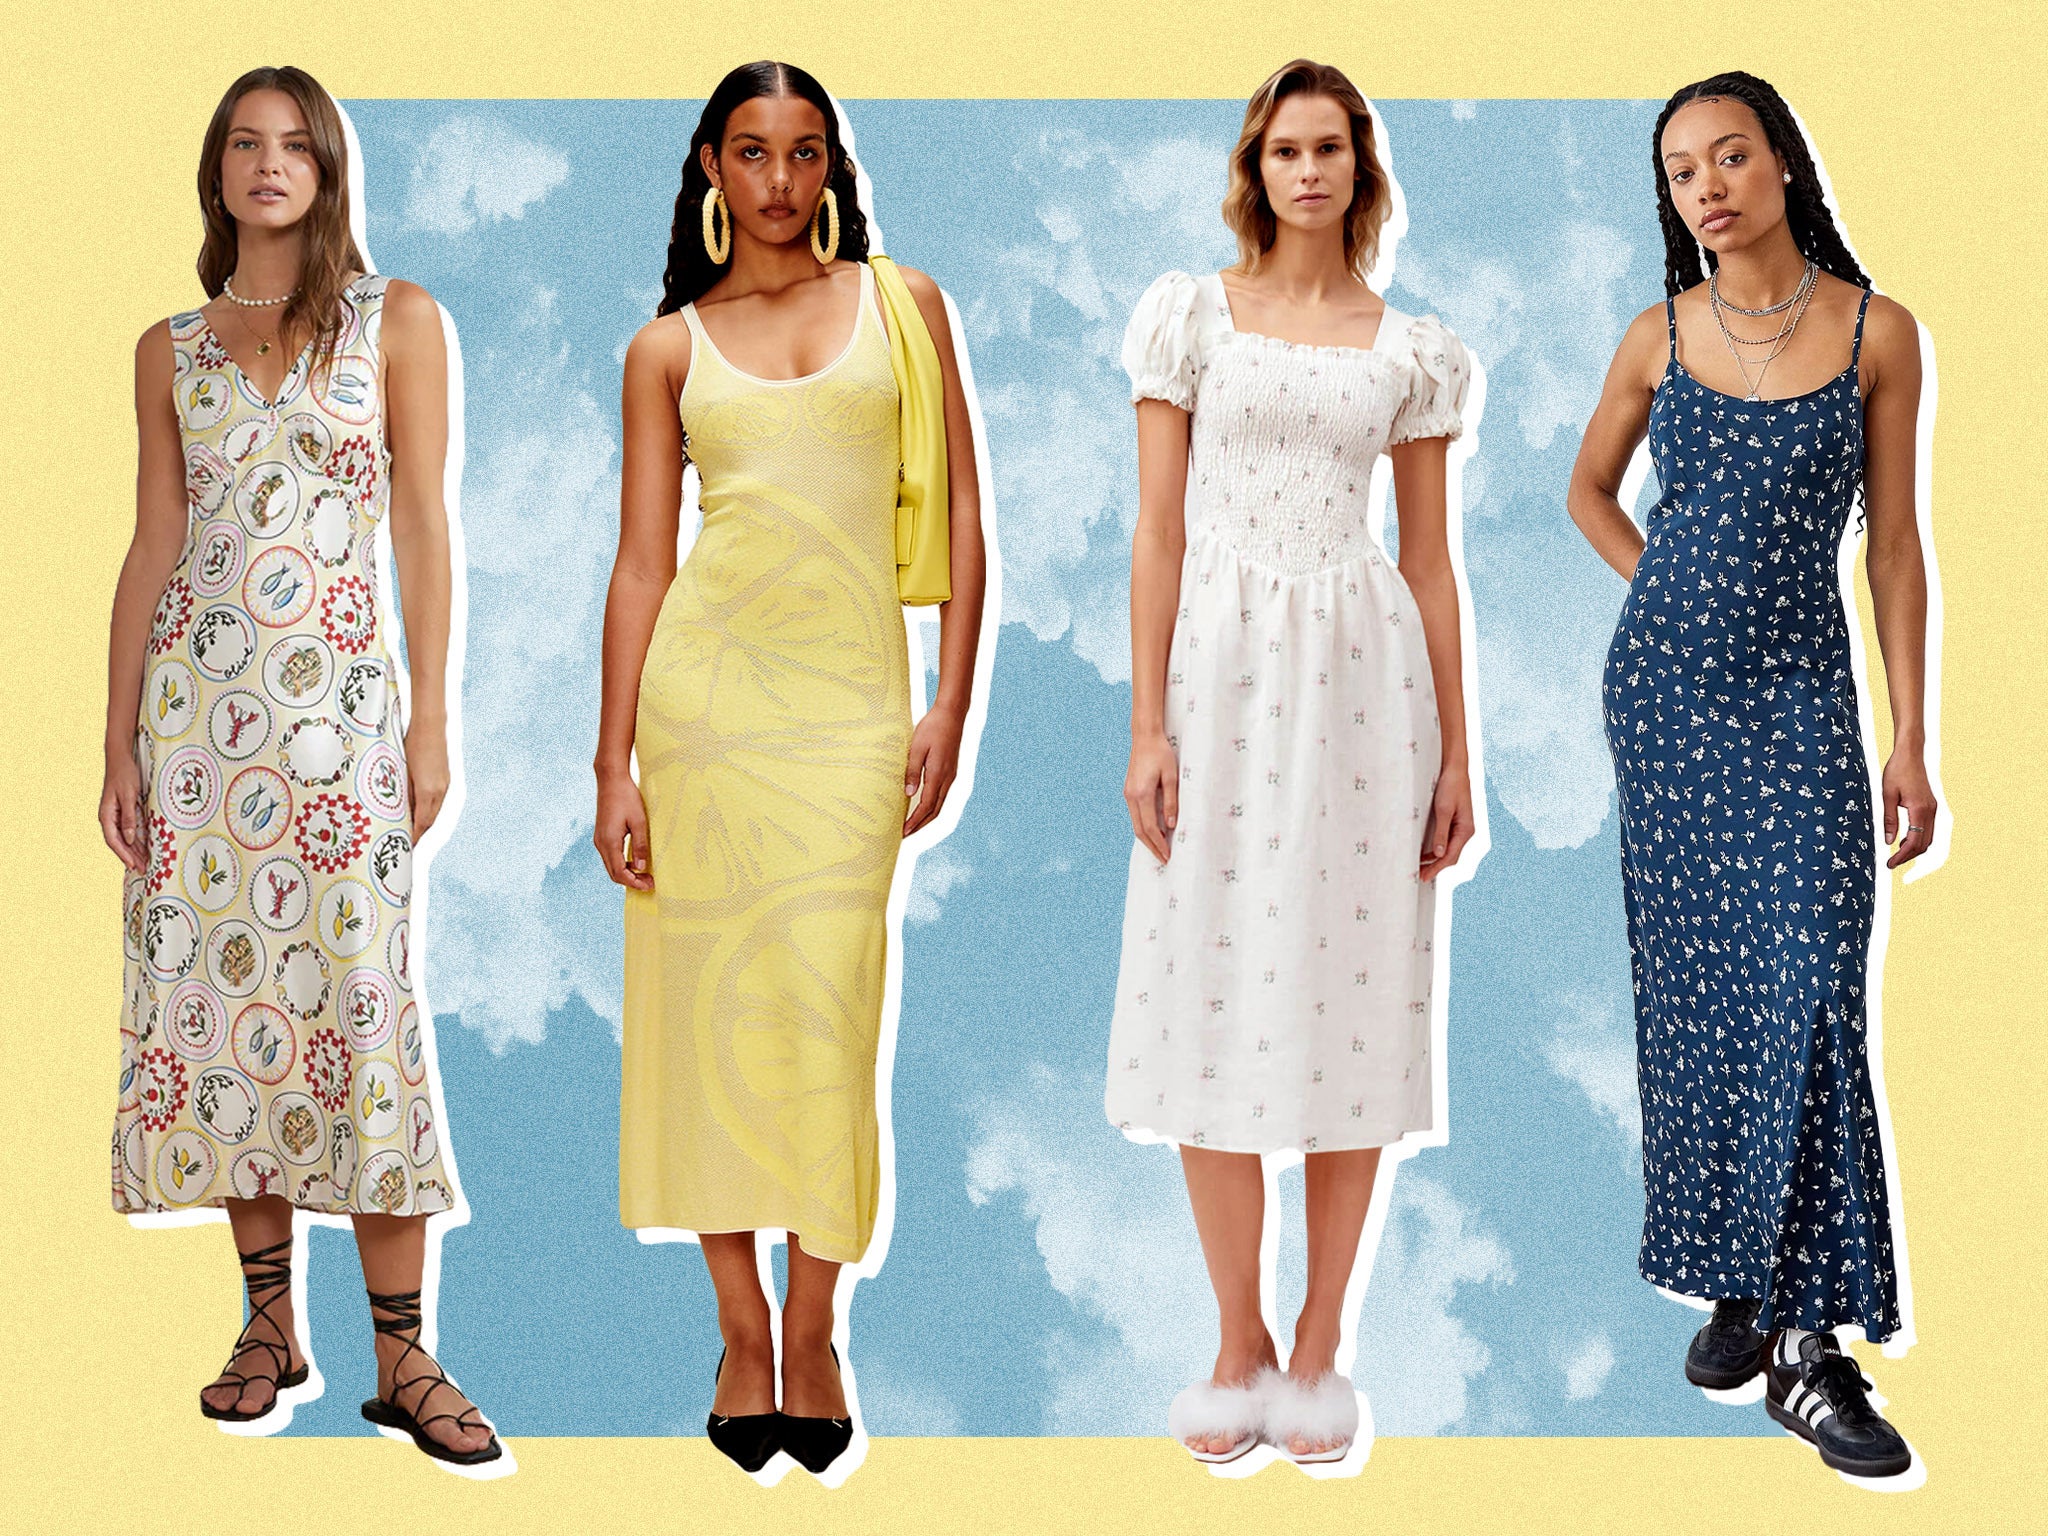 Choose from playful minis, sweeping maxis or everyday midis